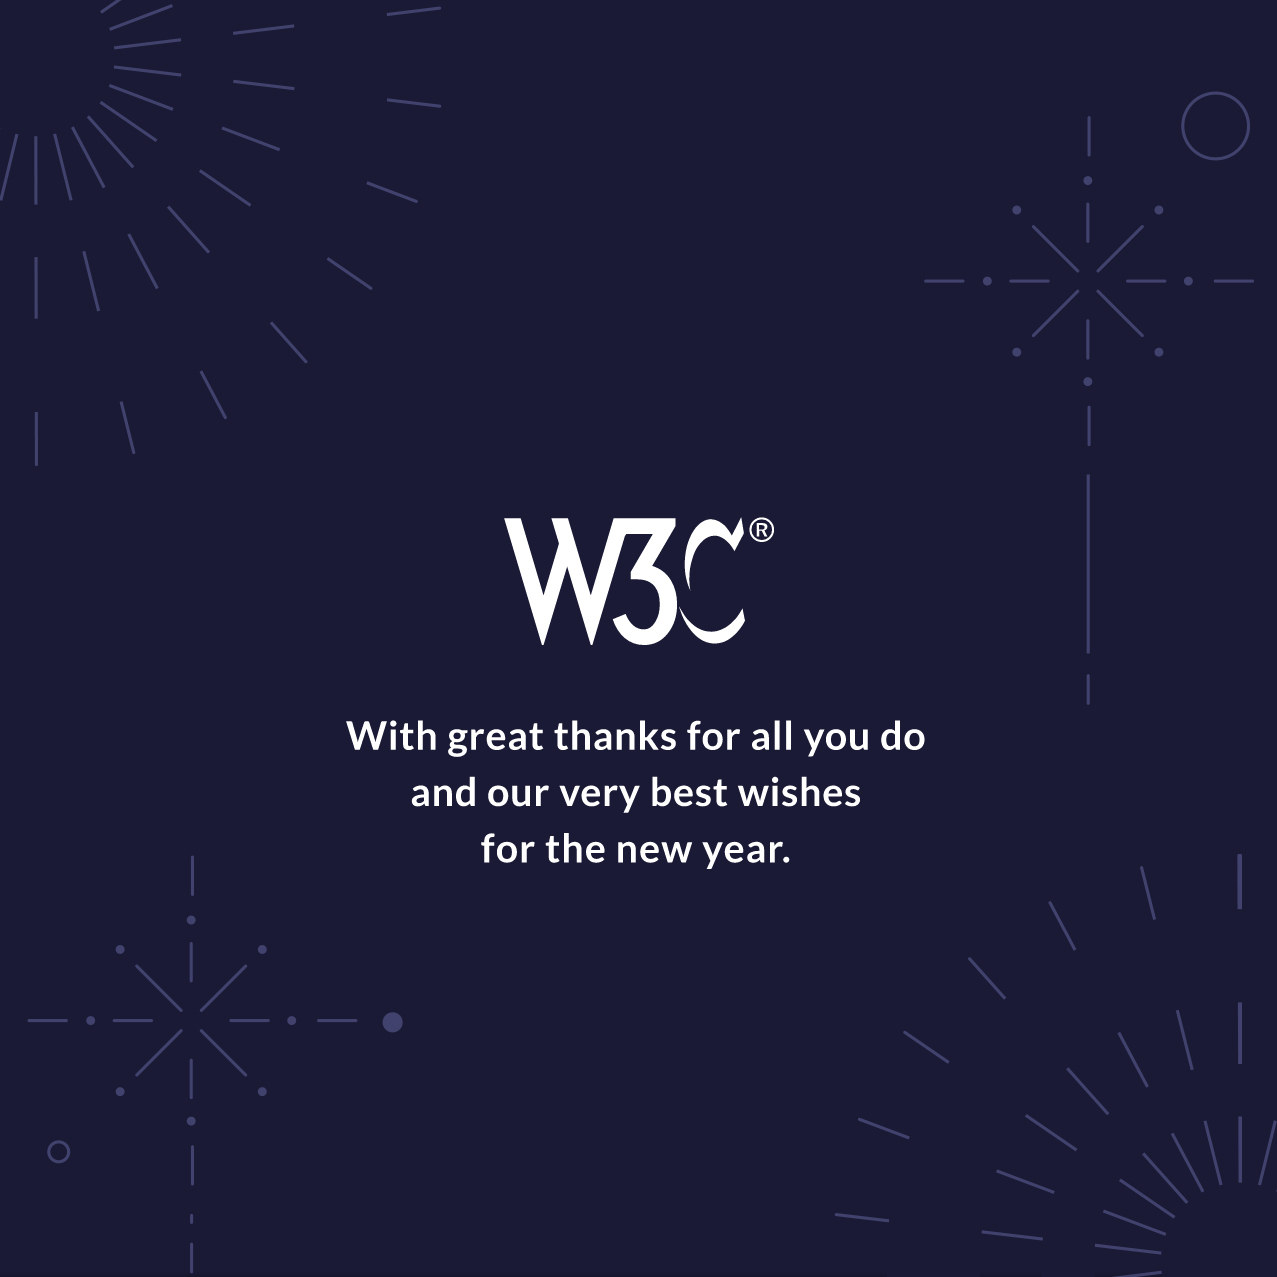 W3C end of year card with W3C logo, text, and illustrations of fireworks 